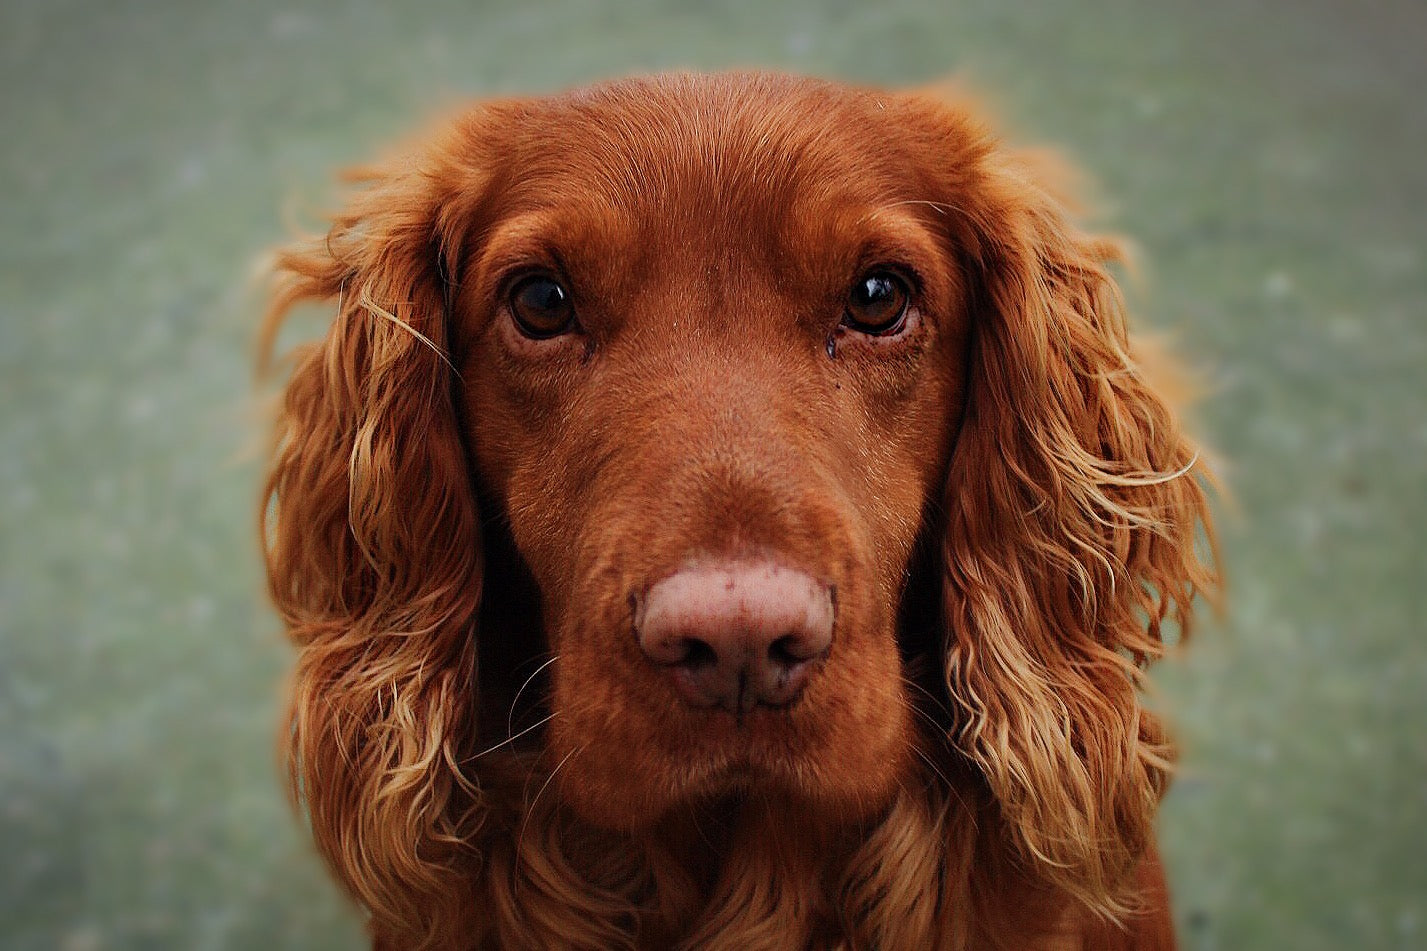 a close up image of an adorable red dog looking straight ahead